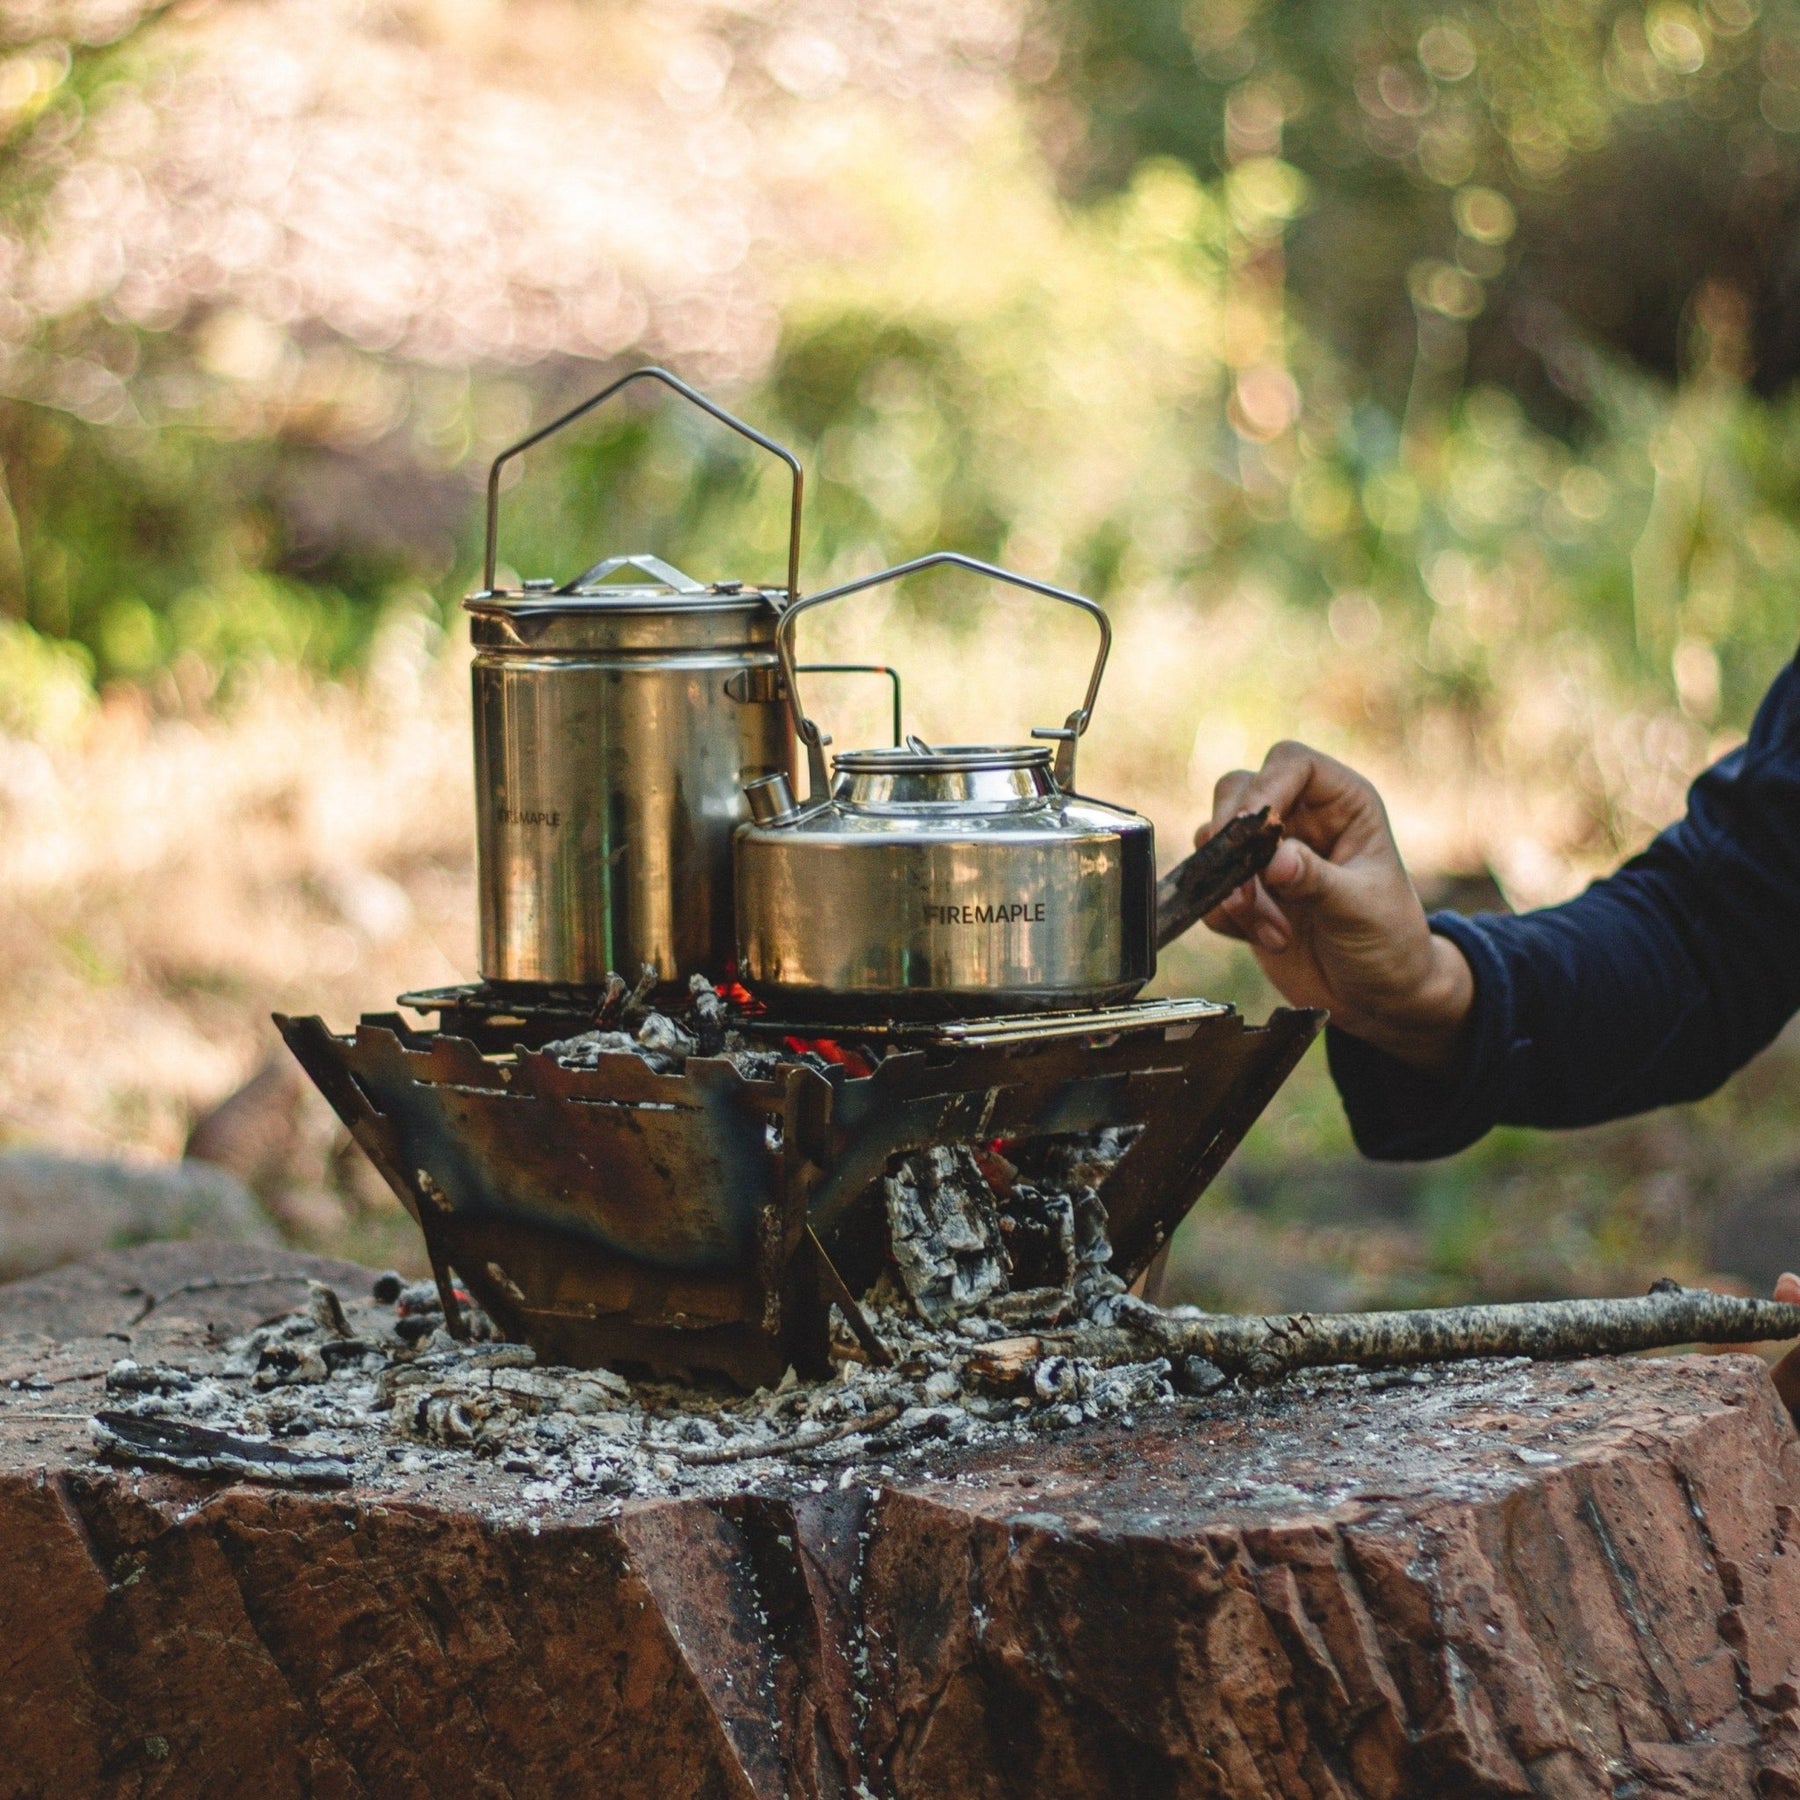 Fire Maple Antarcti Stainless Steel Backpacking Camping Kettle Bushcraft  Gear Outdoor Durable Teapot High Quality S304 1L 295g